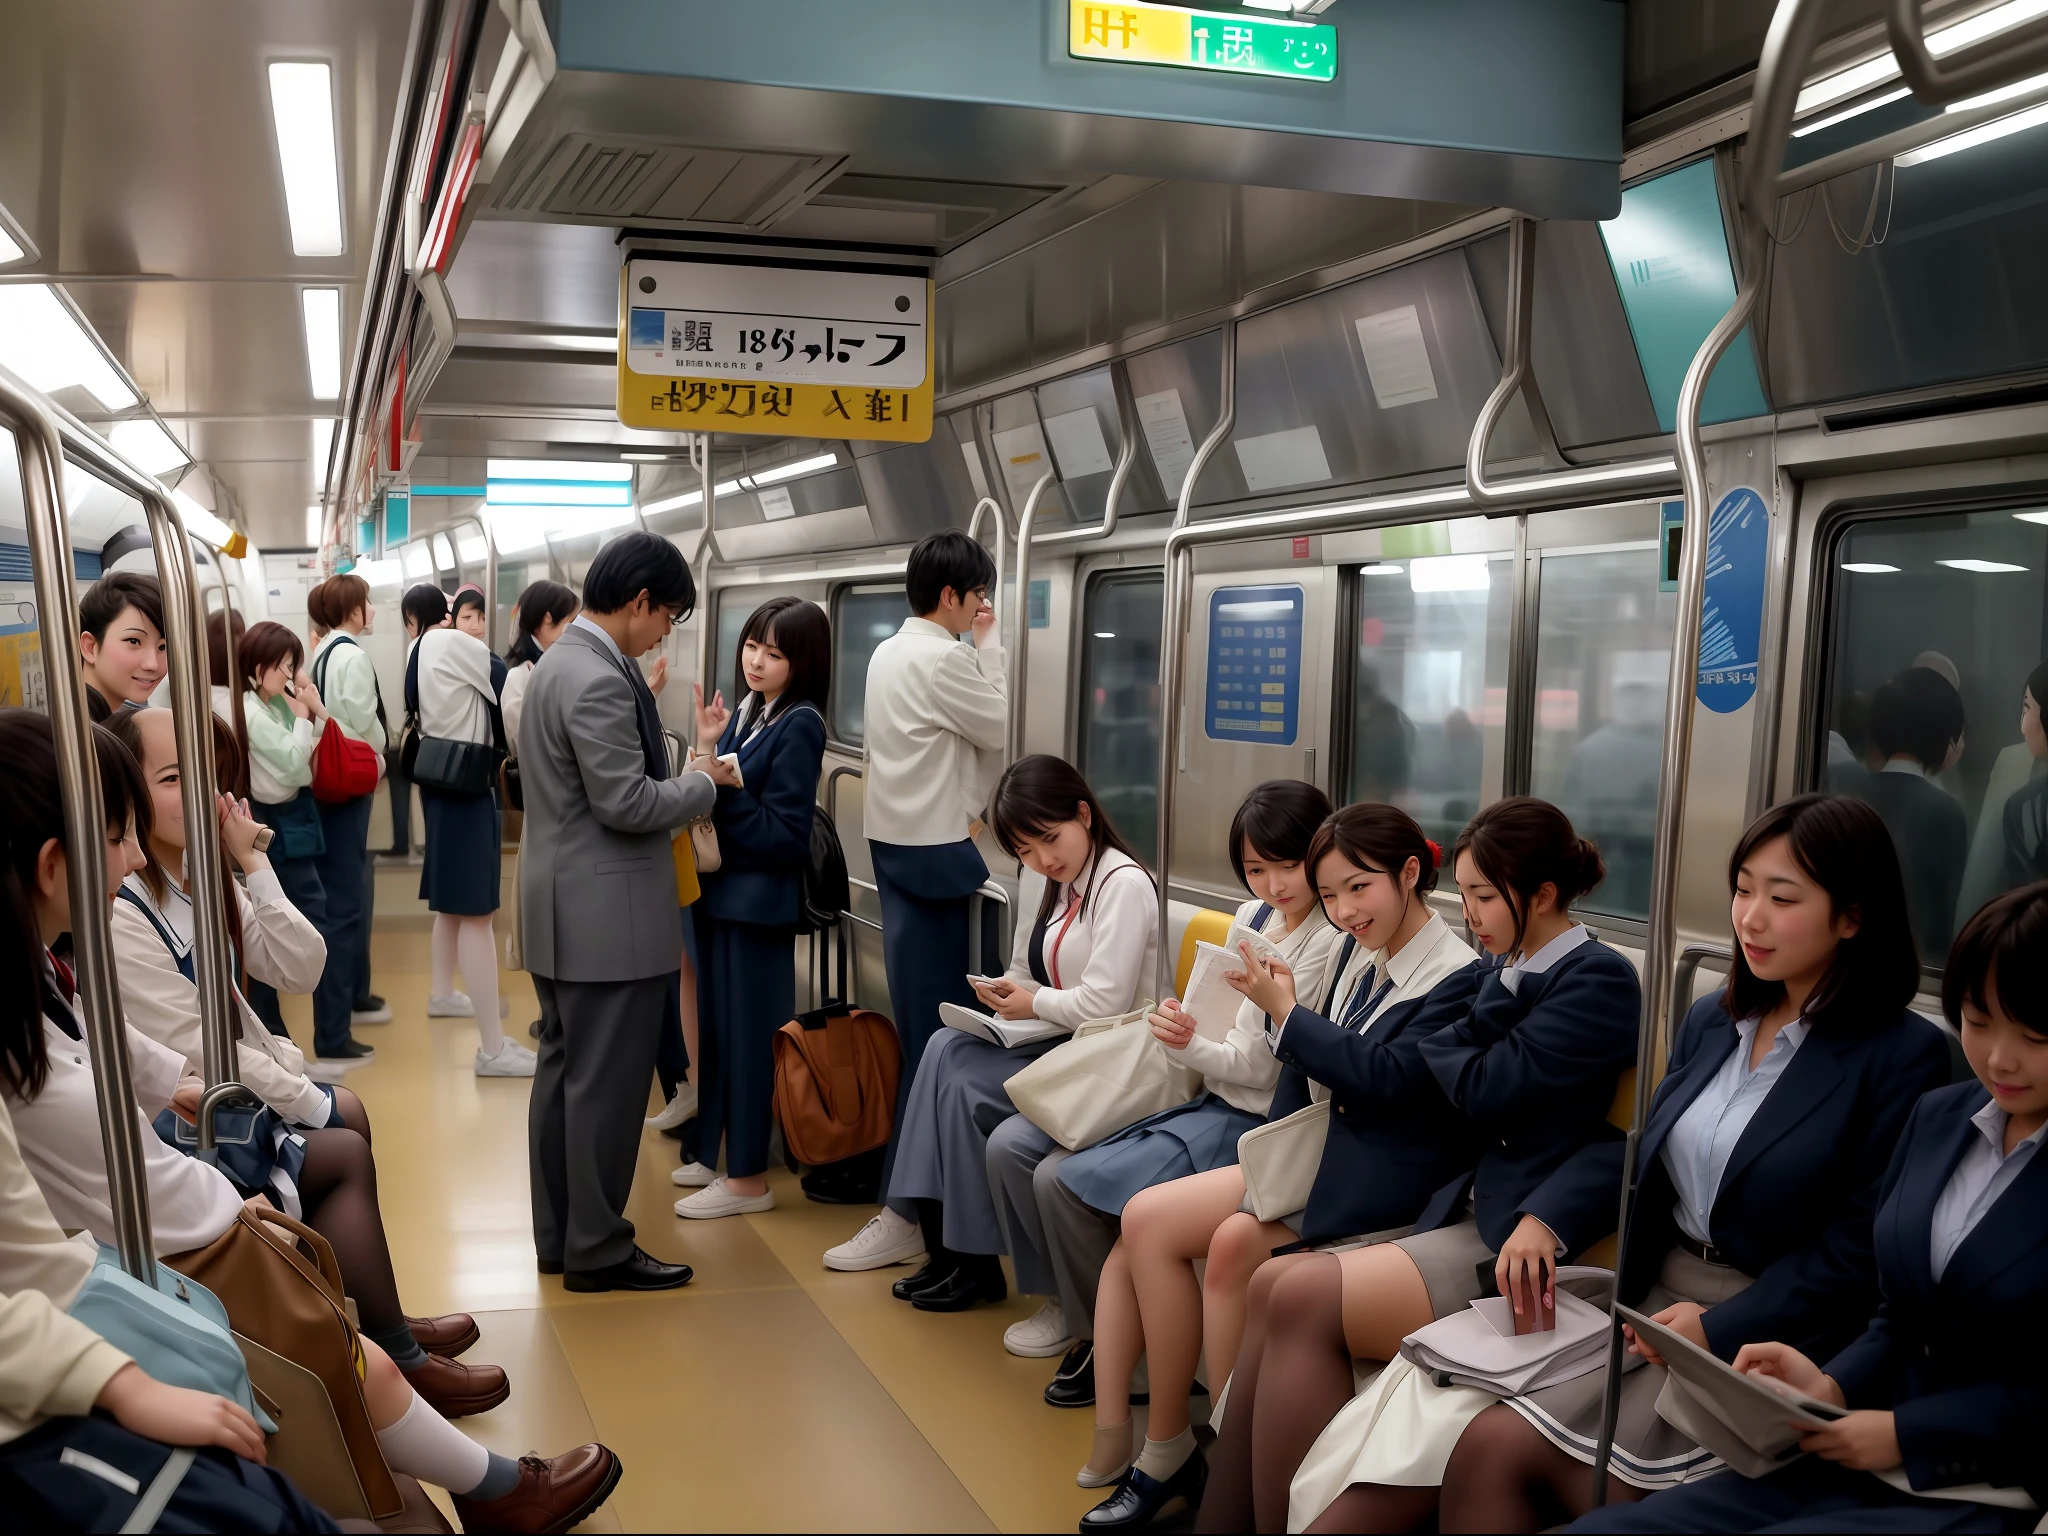 Masterpiece, top quality animation, scene of high school girls with bright expressions riding on subway train in , beautiful faces in Japan school uniforms, smiling faces, scenery like Makoto Shinkai.